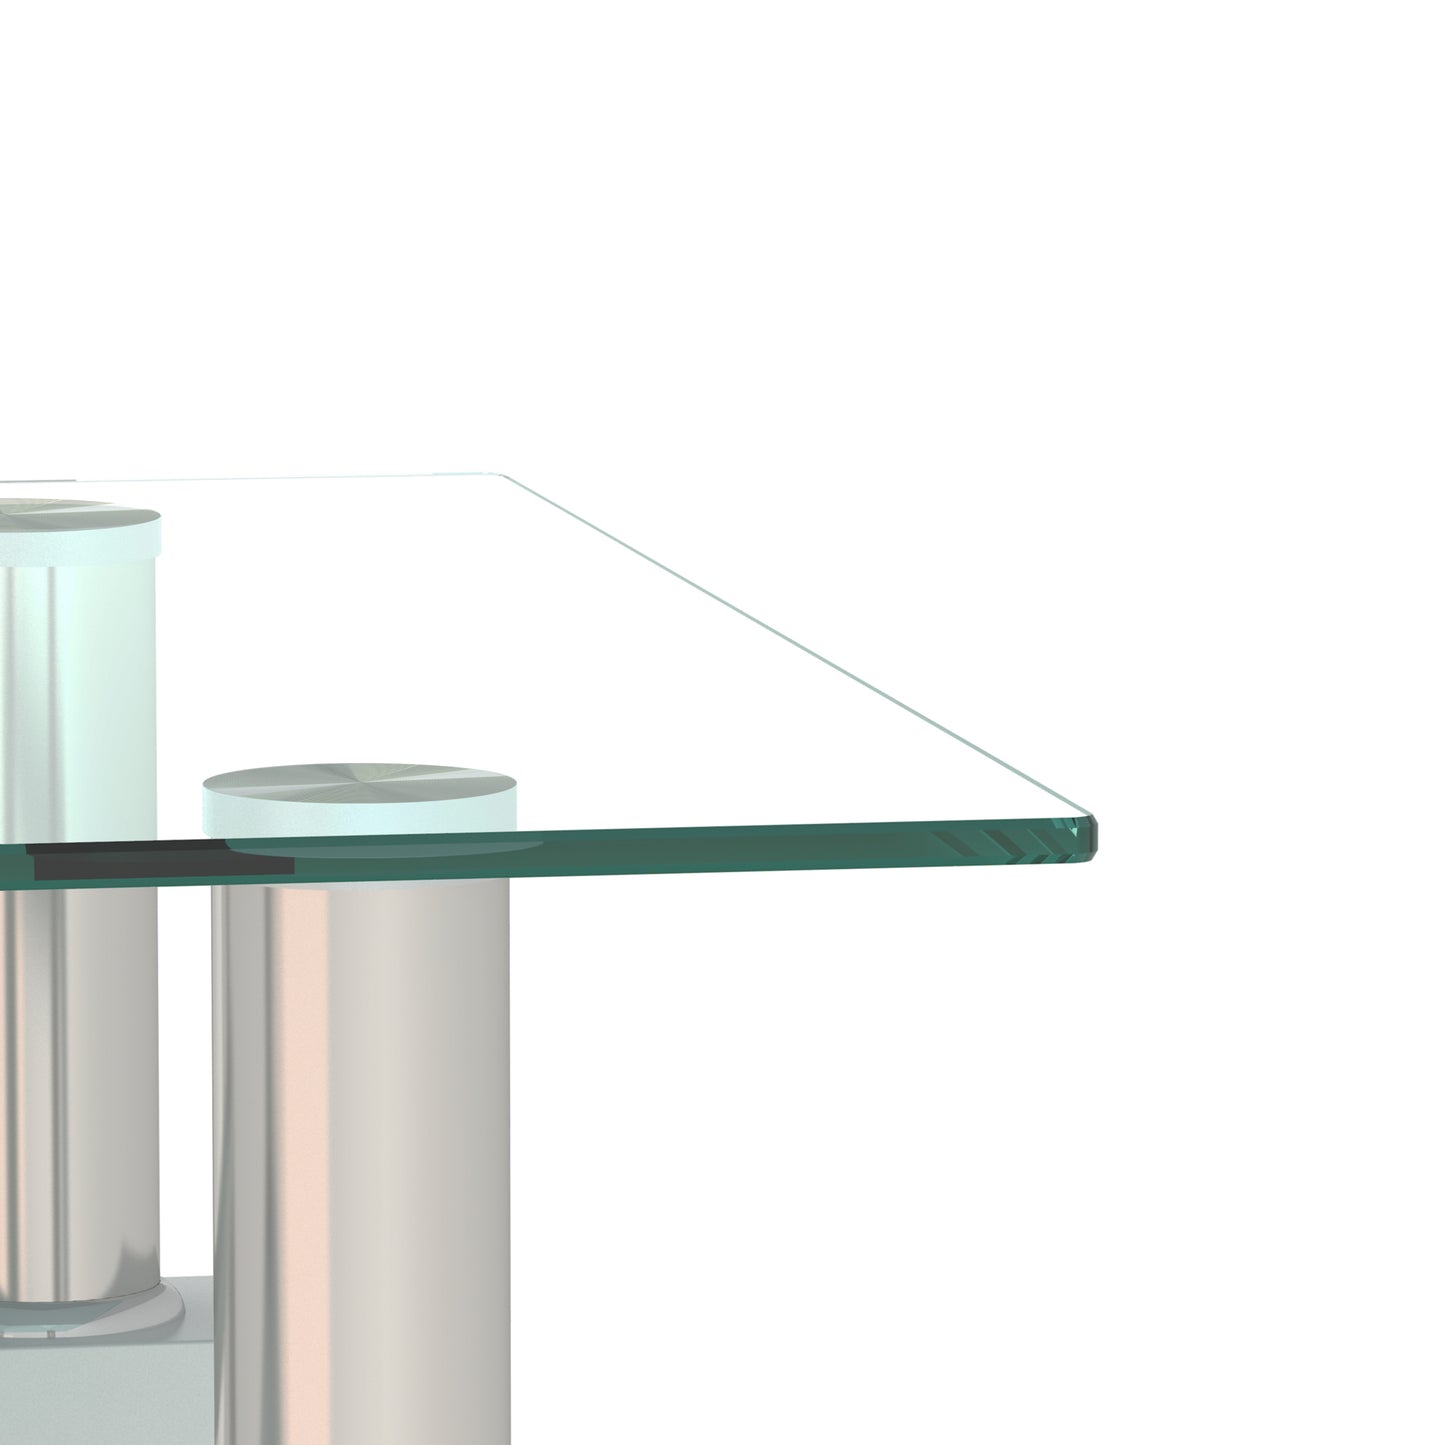 1-Piece Modern Tempered Glass Table